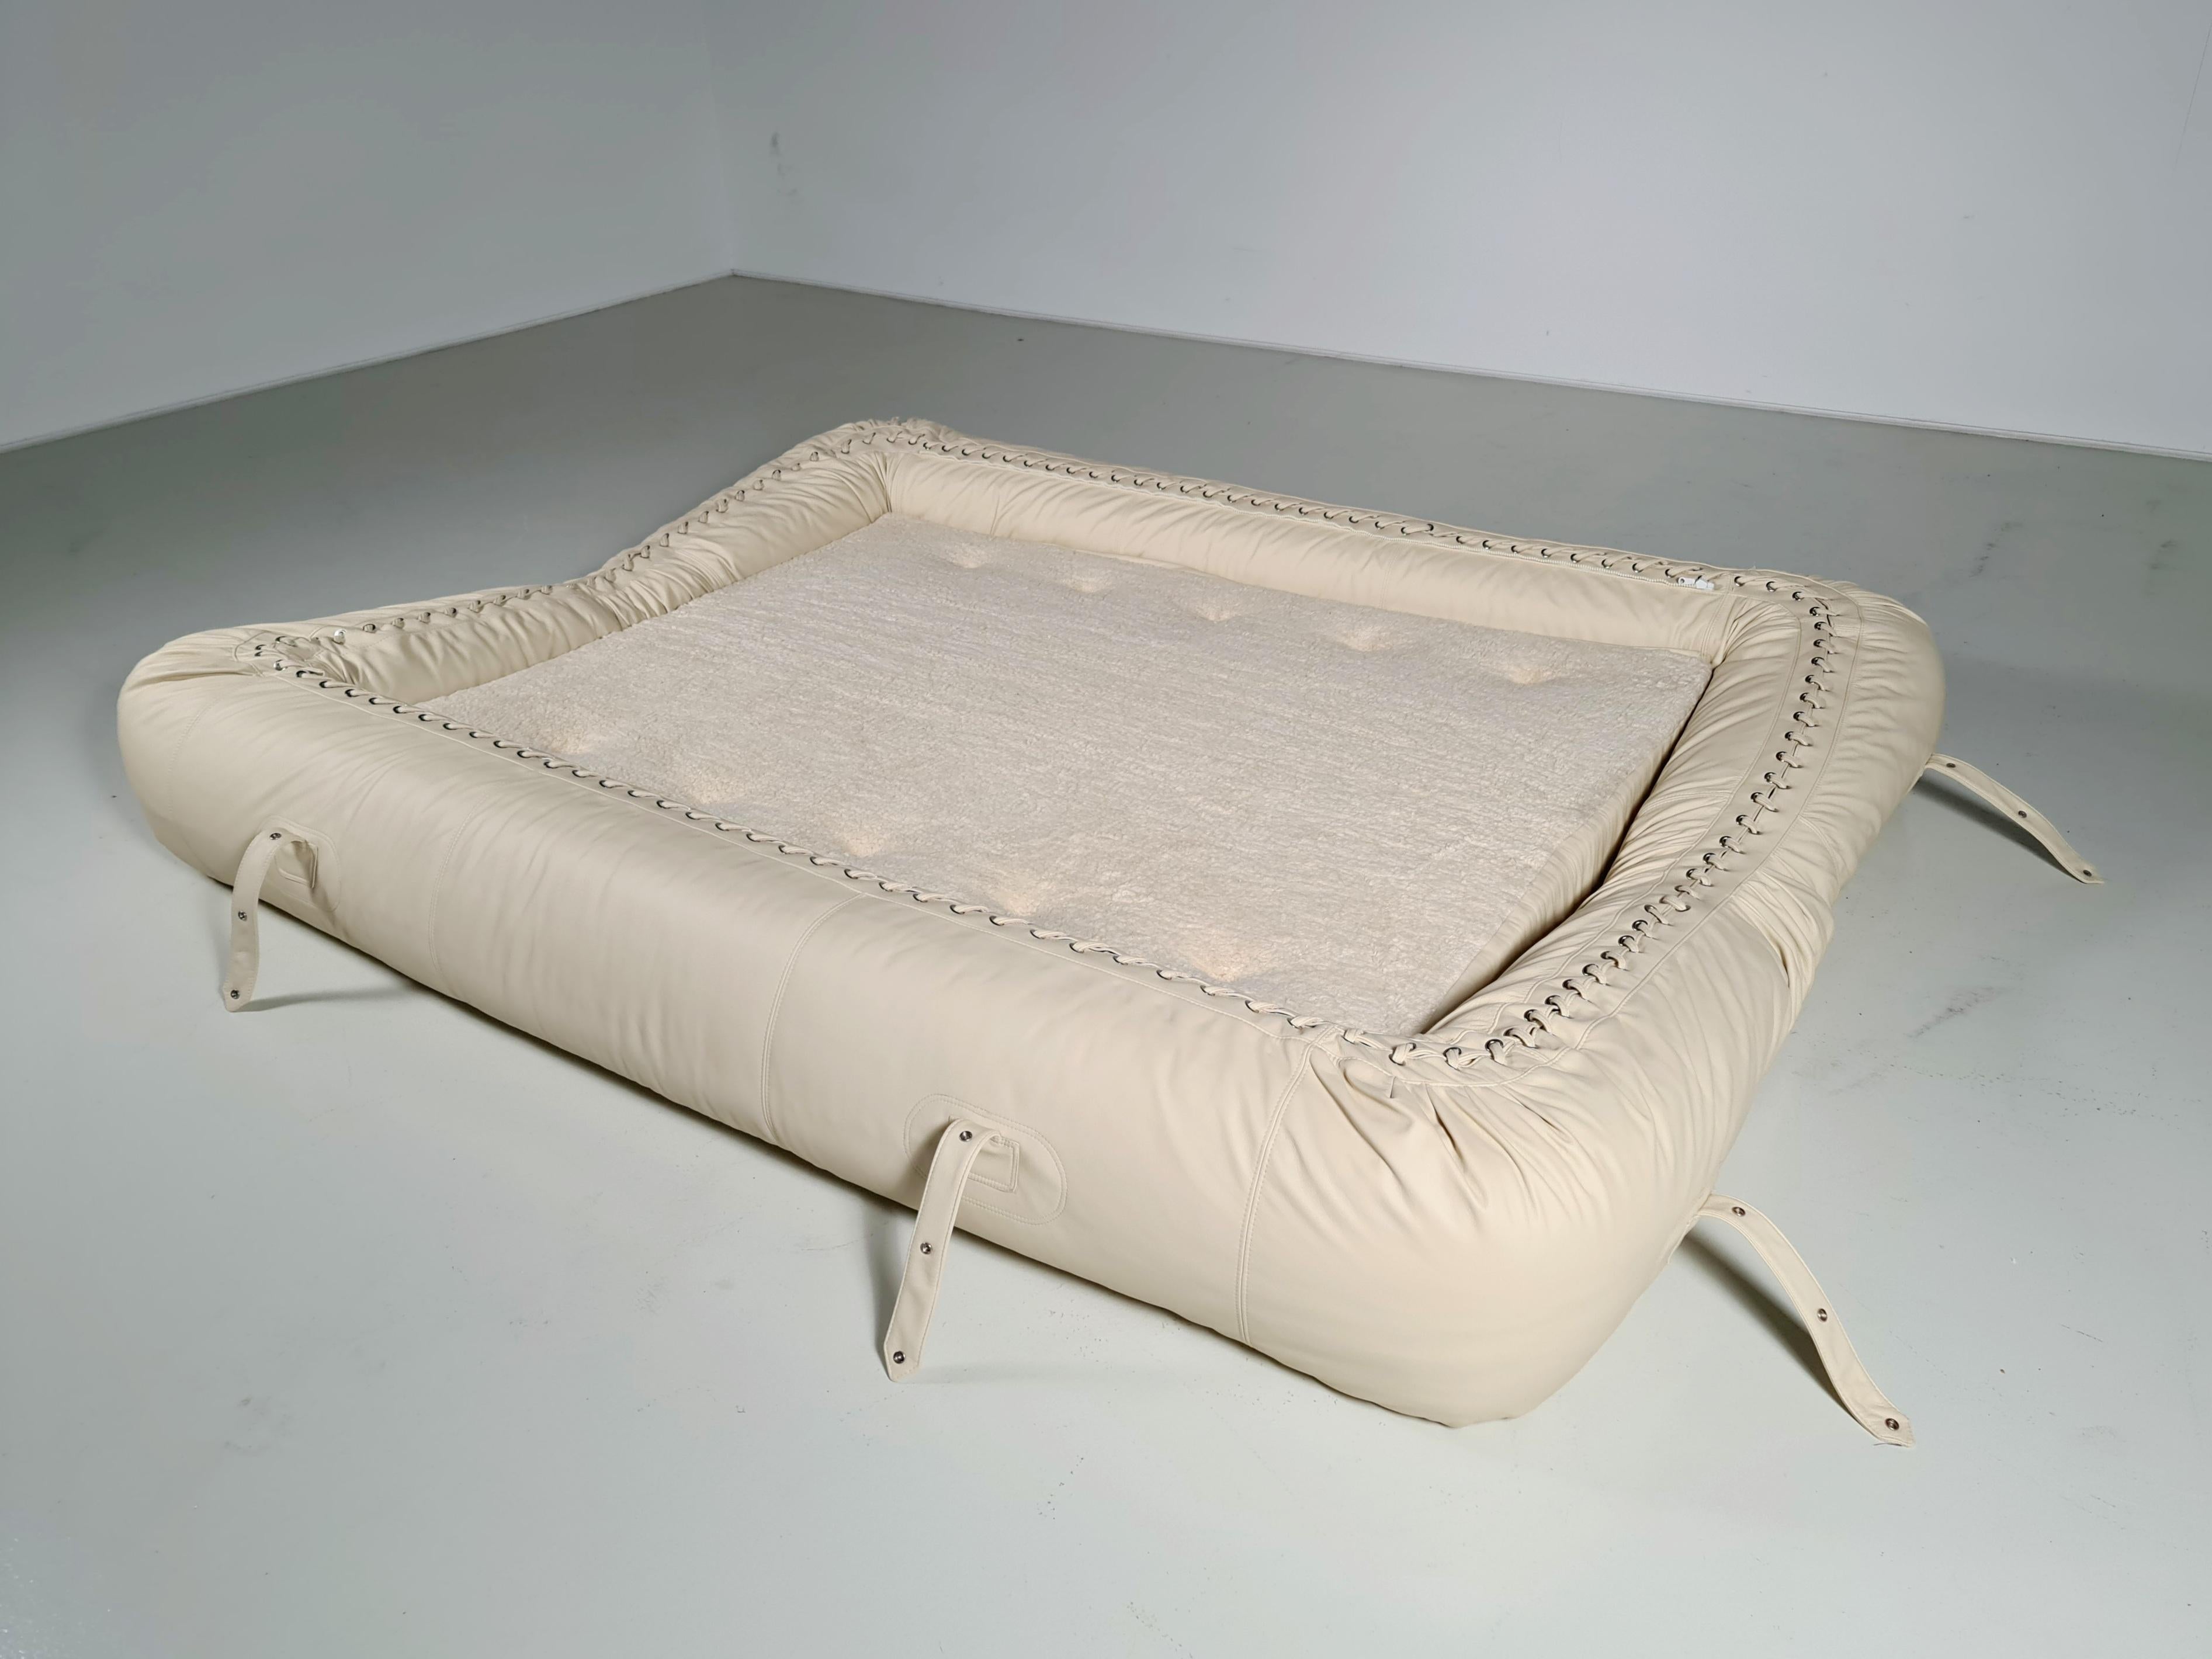 European Anfibio Sofa by Alessandro Becchi for Giovanetti in Creme Leather, 1970s